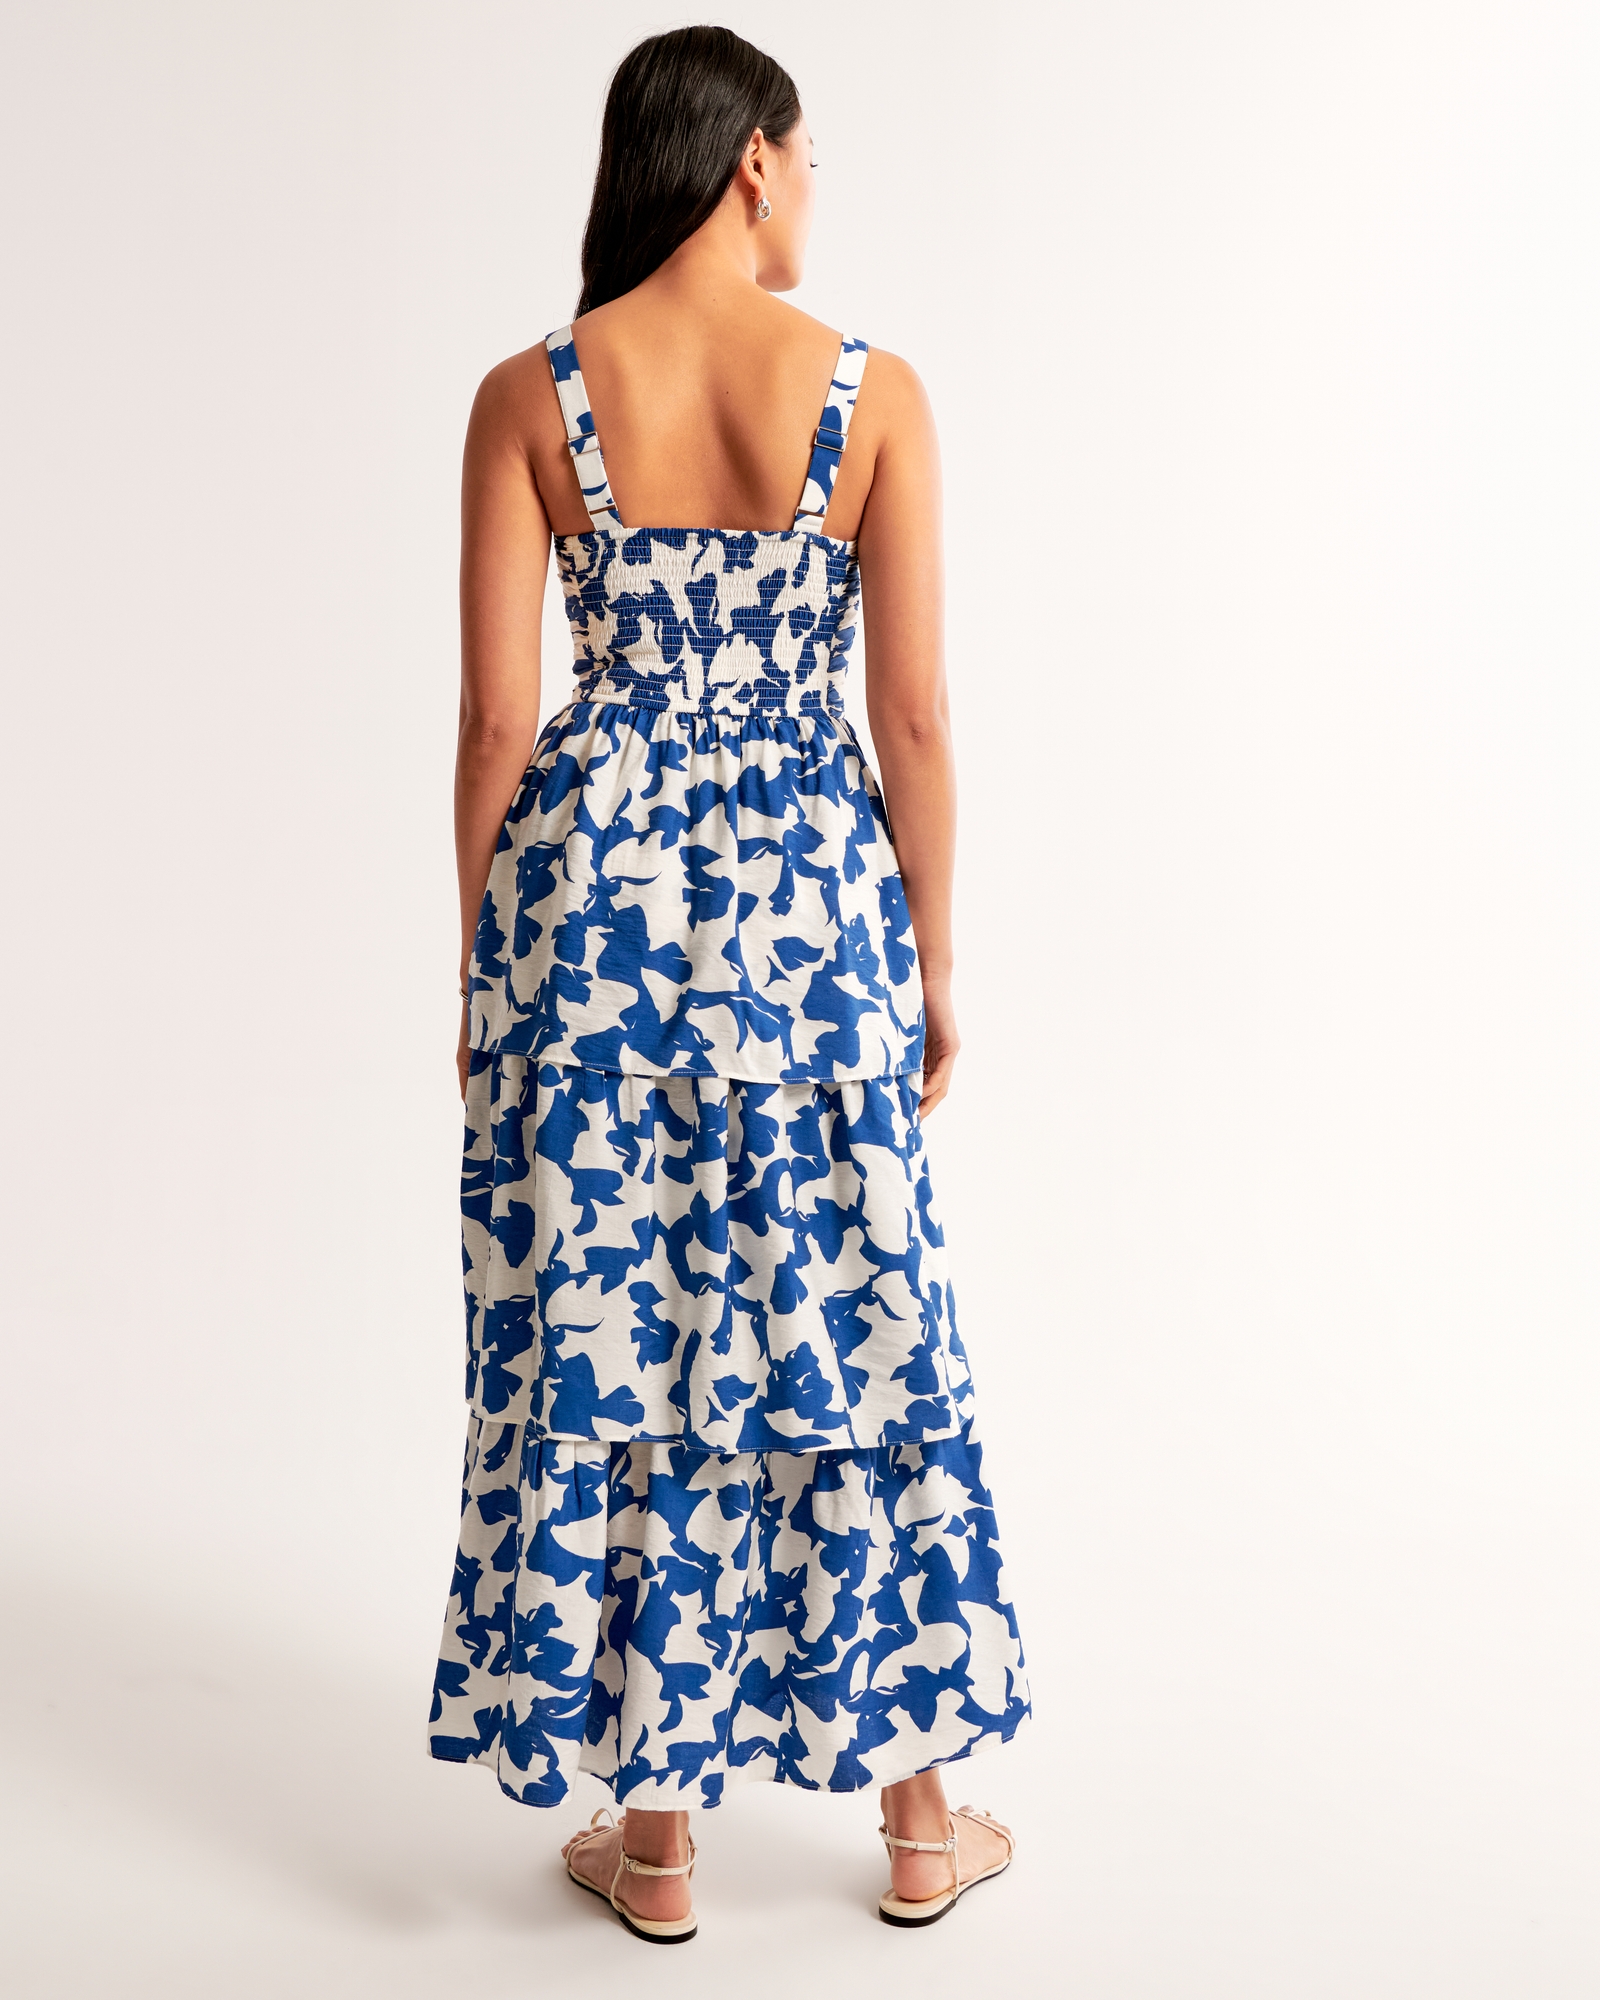 The A&F Emerson Tiered Maxi Dress